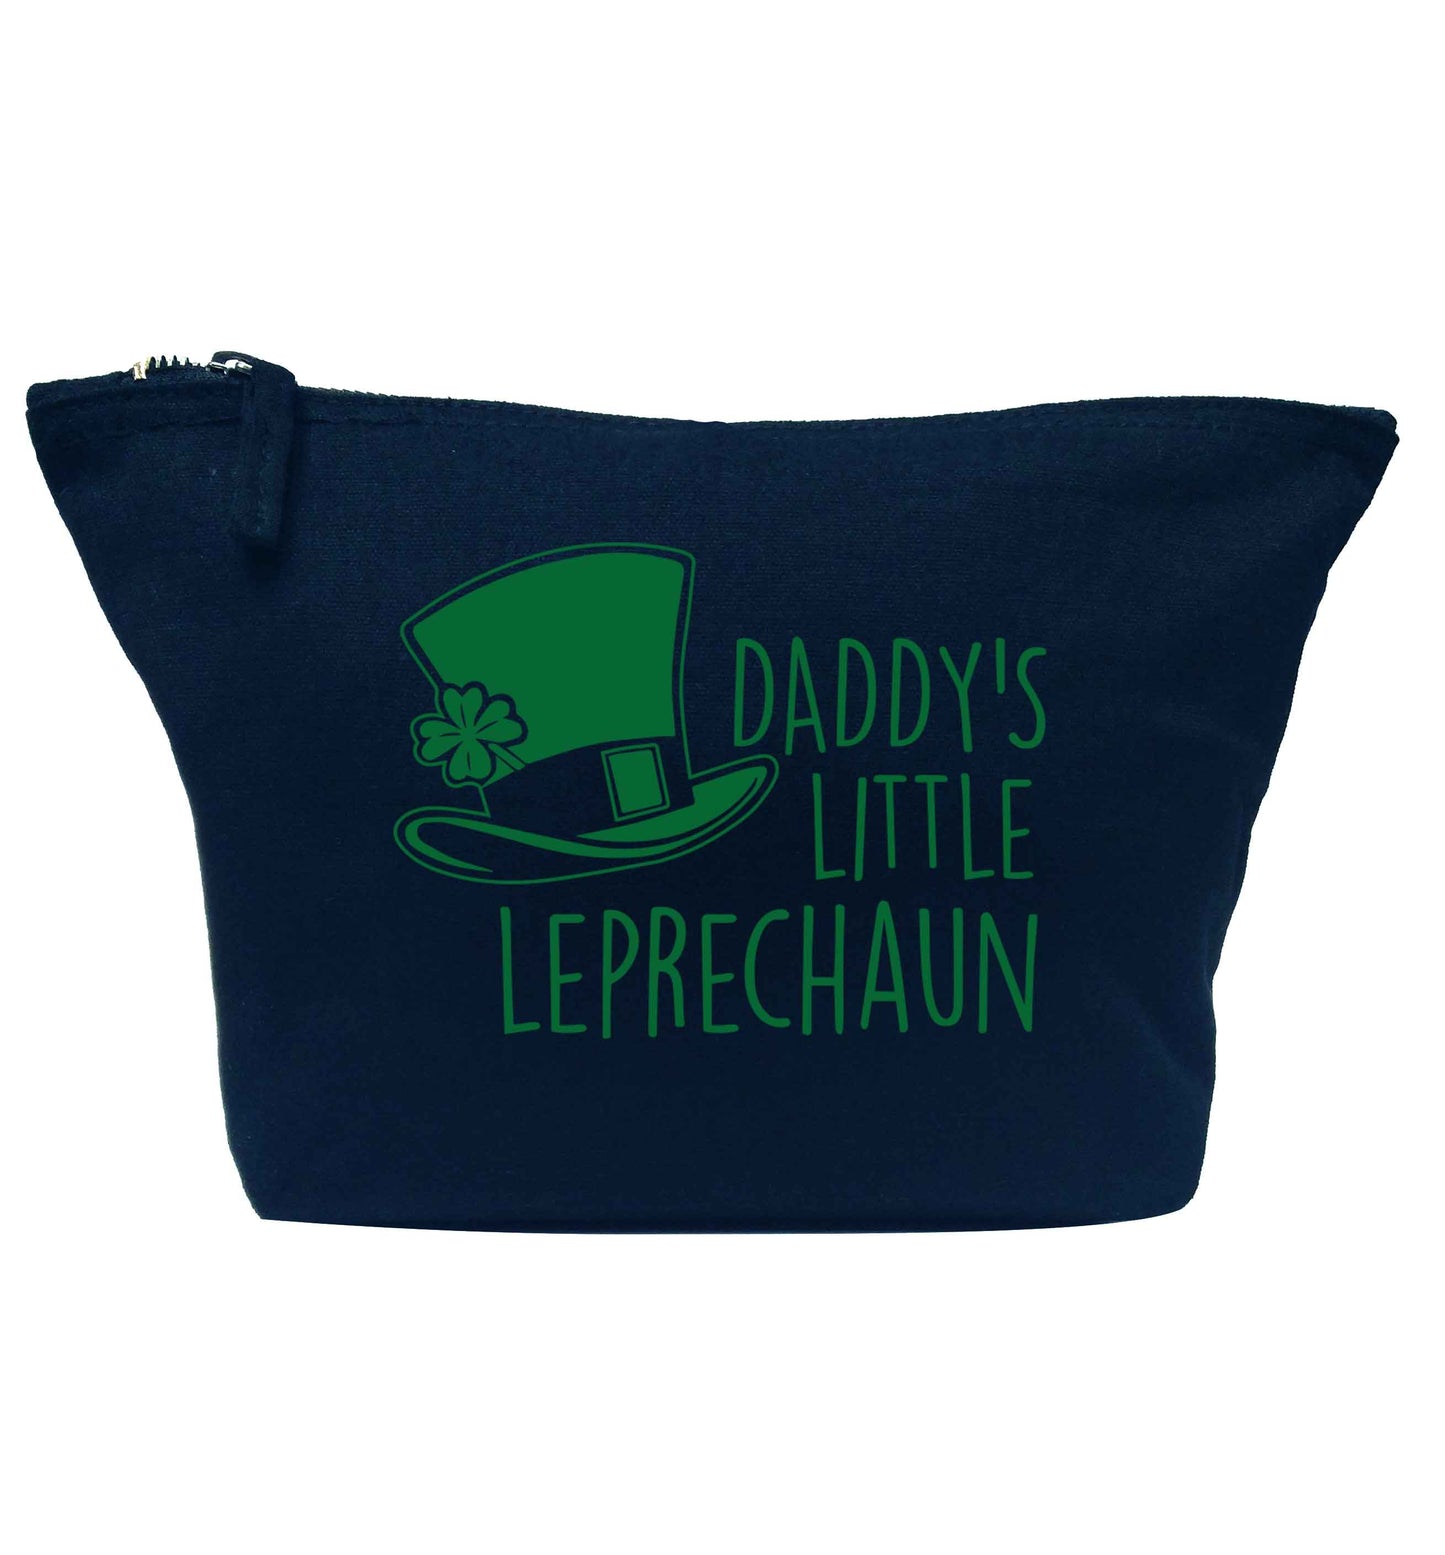 Daddy's lucky charm navy makeup bag